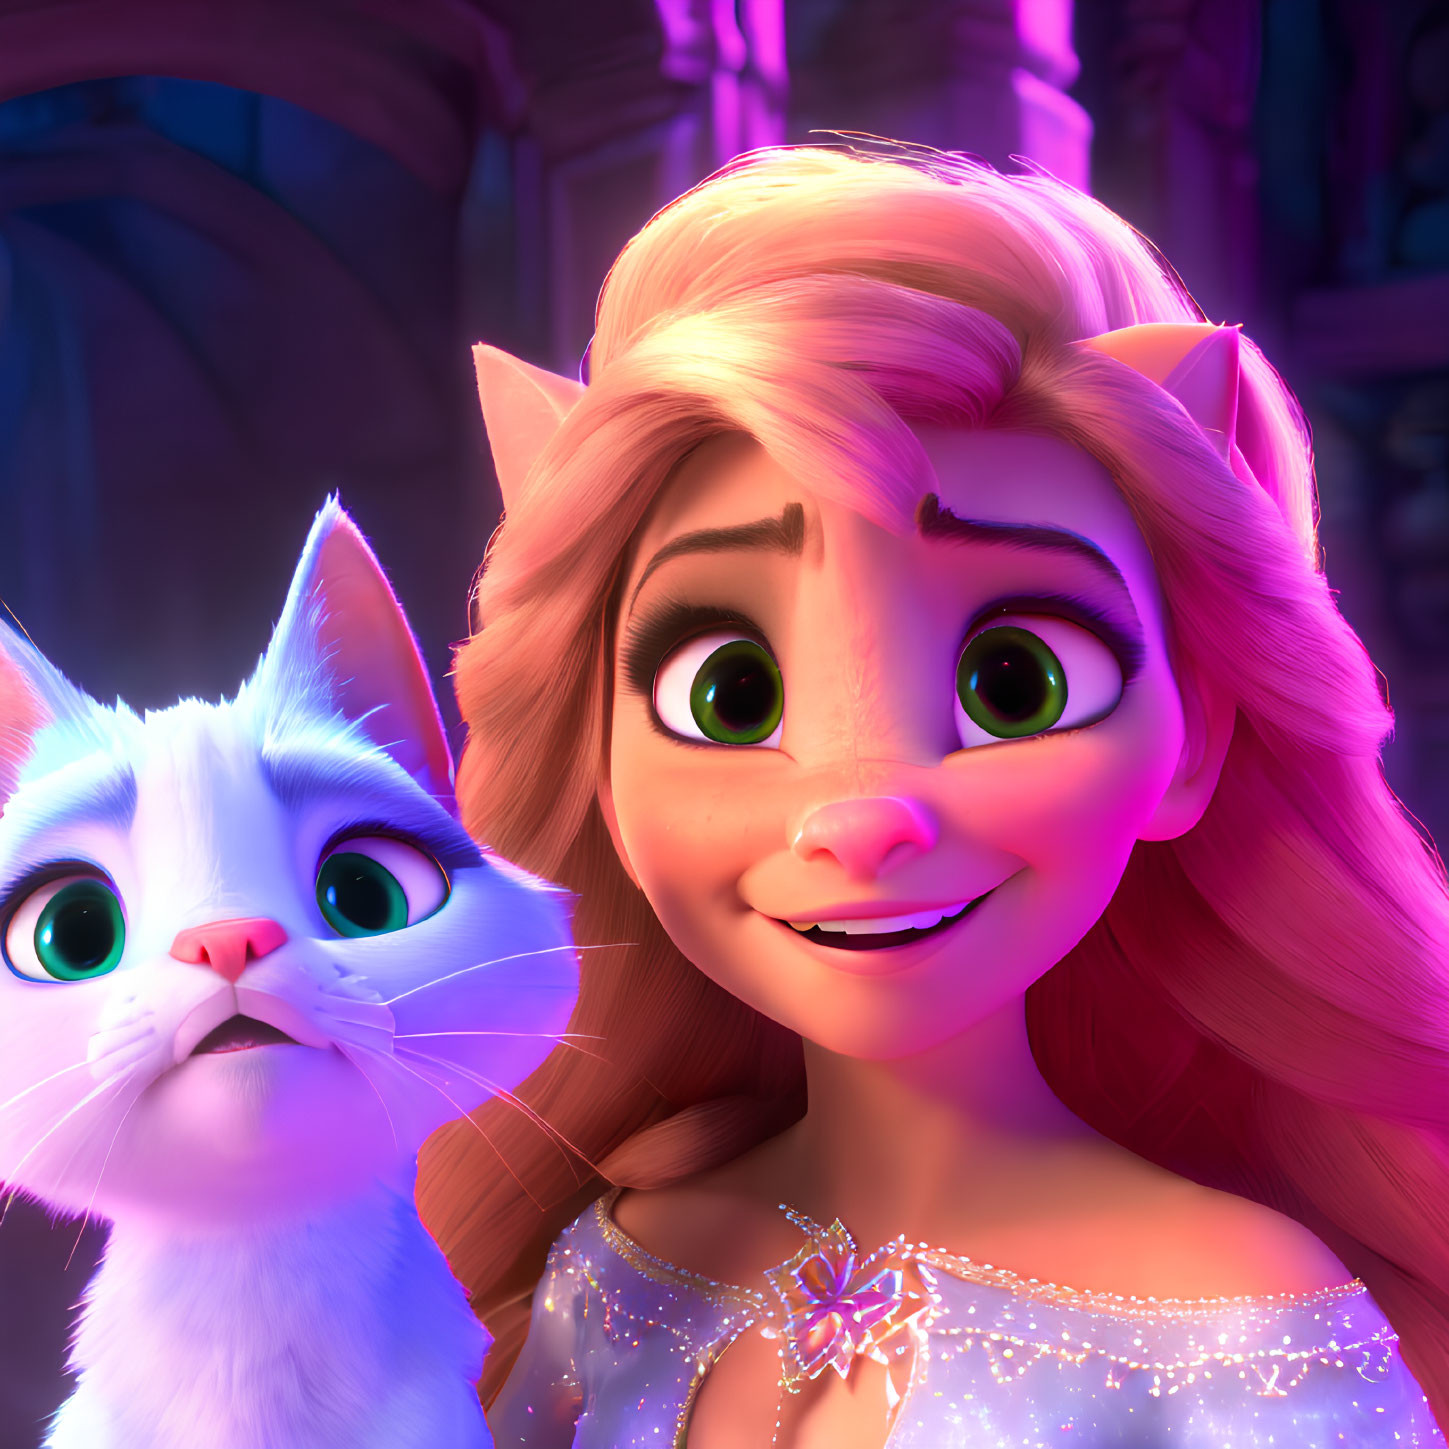 Golden-haired girl and white cat in purple dress, surprised expressions.